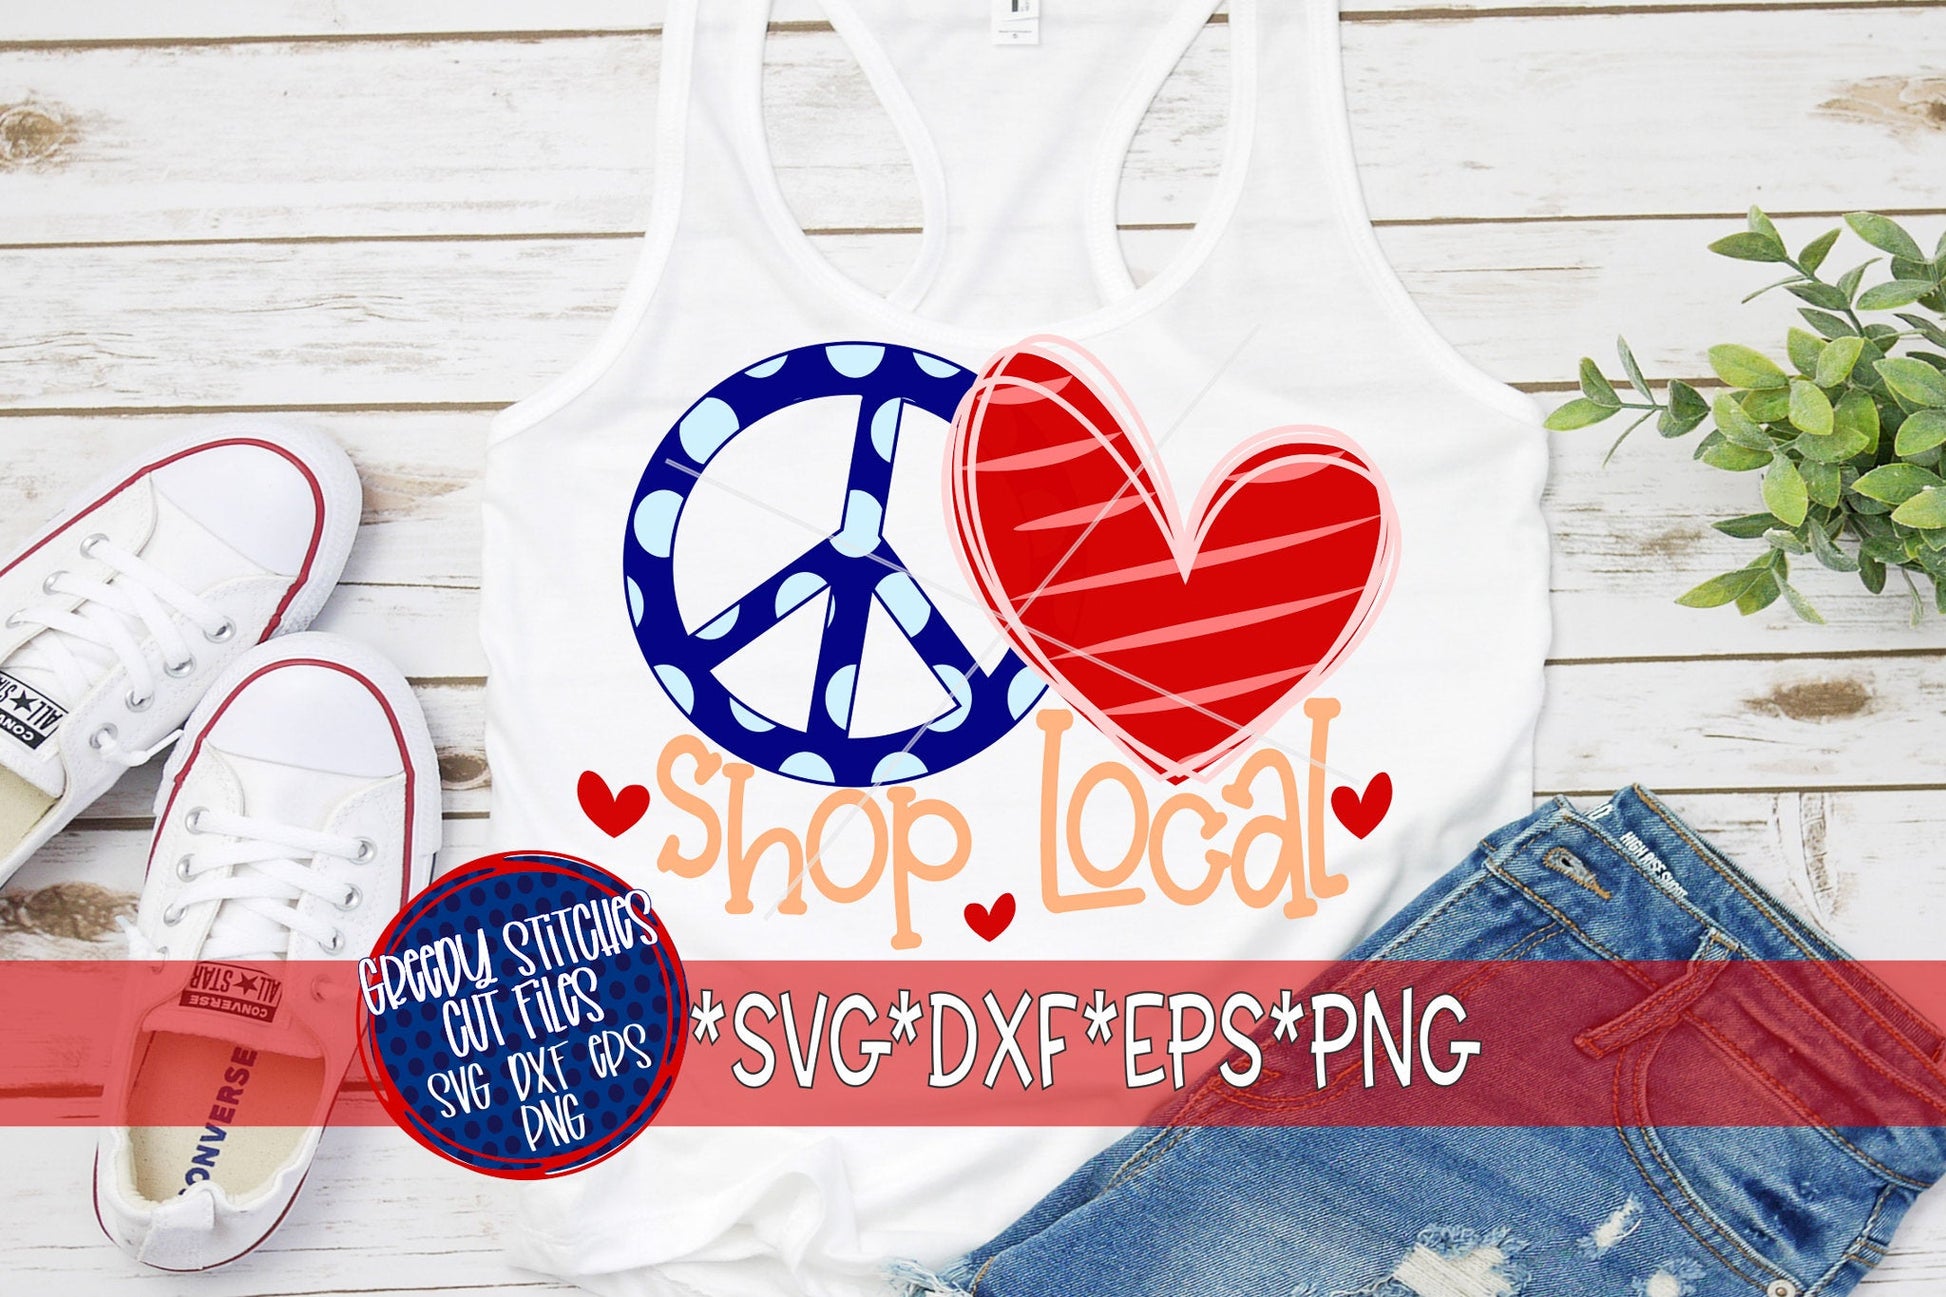 Peace Love Shop Local SvG | Shop Local SvG | Shop Local SvG | Shop Local svg dxf eps png | Local SvG | Shop Local |Instant Download Cut File